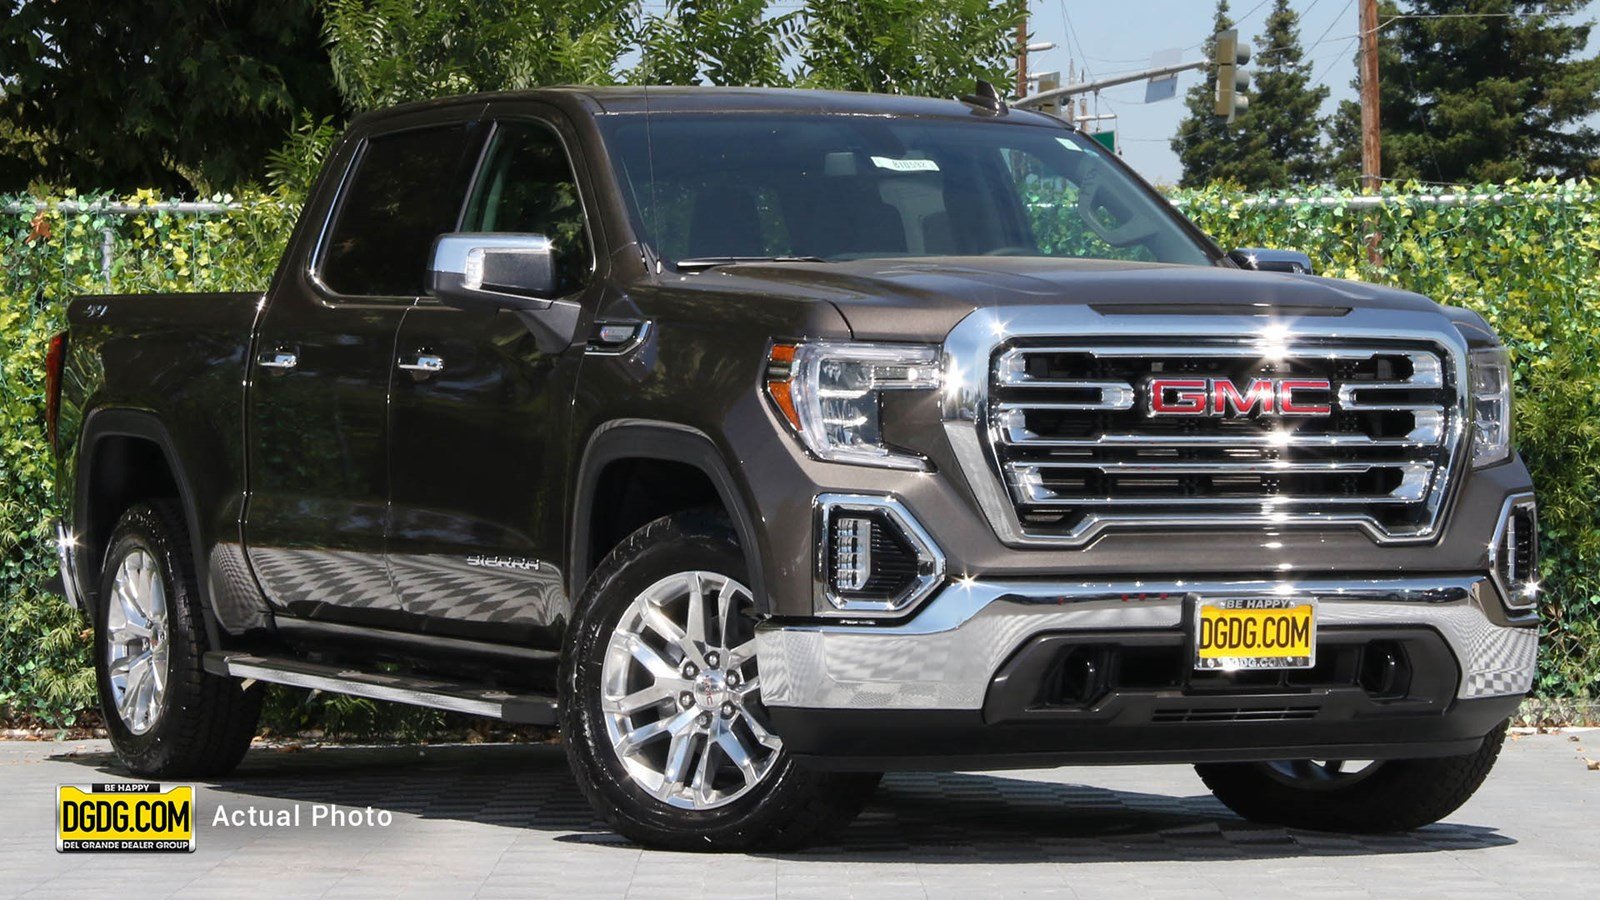 2018 GMC Sierra vs. 2019 GMC Sierra: What's the Difference ...